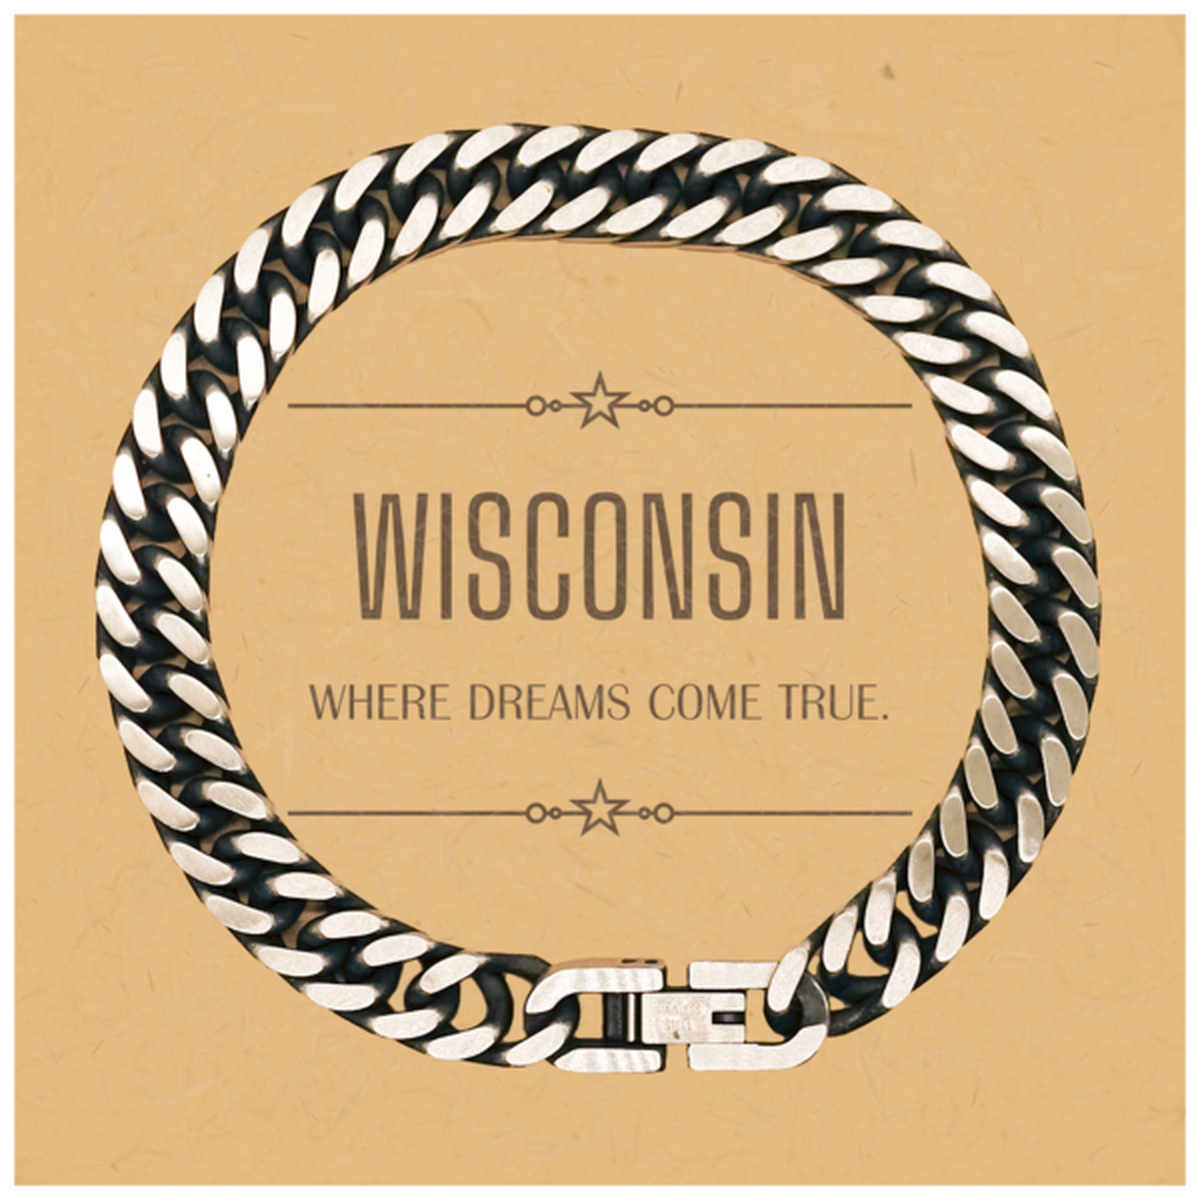 Love Wisconsin State Cuban Link Chain Bracelet, Wisconsin Where dreams come true, Birthday Christmas Inspirational Gifts For Wisconsin Men, Women, Friends